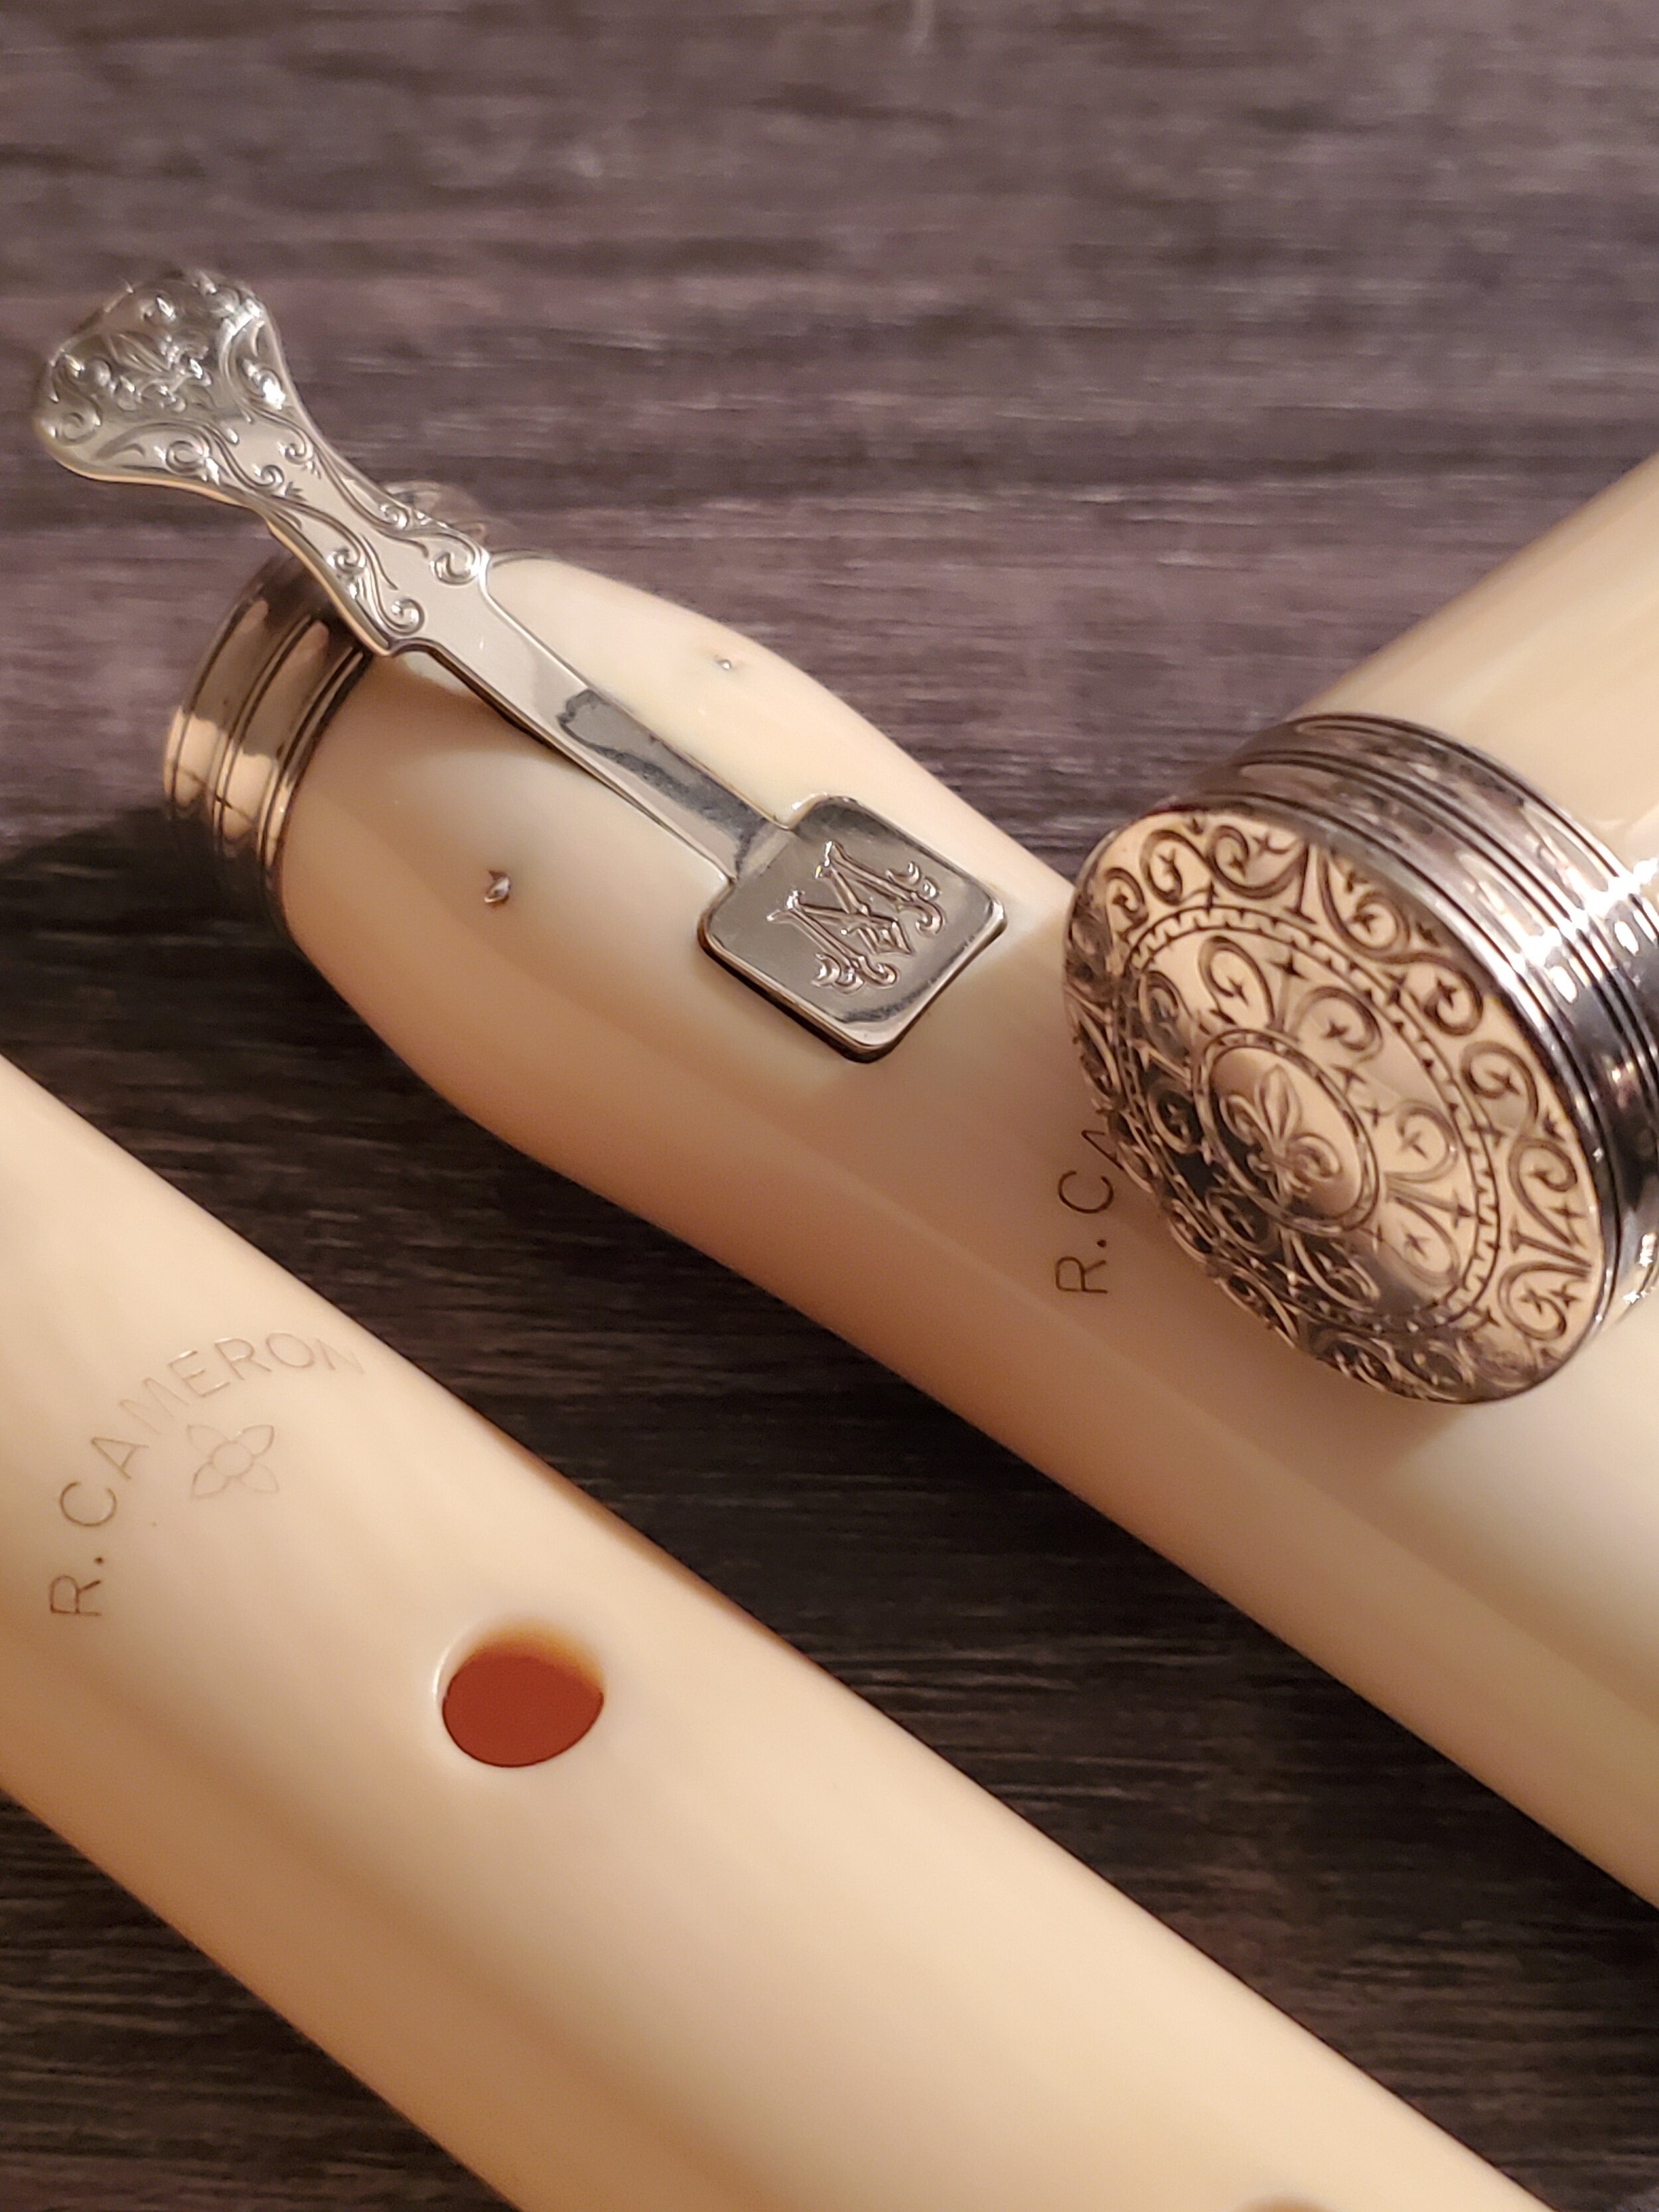  Flute in Ivory after Cahusac by Rod Cameron. Key and headcap engraving by Brian Powley. A=415/430 